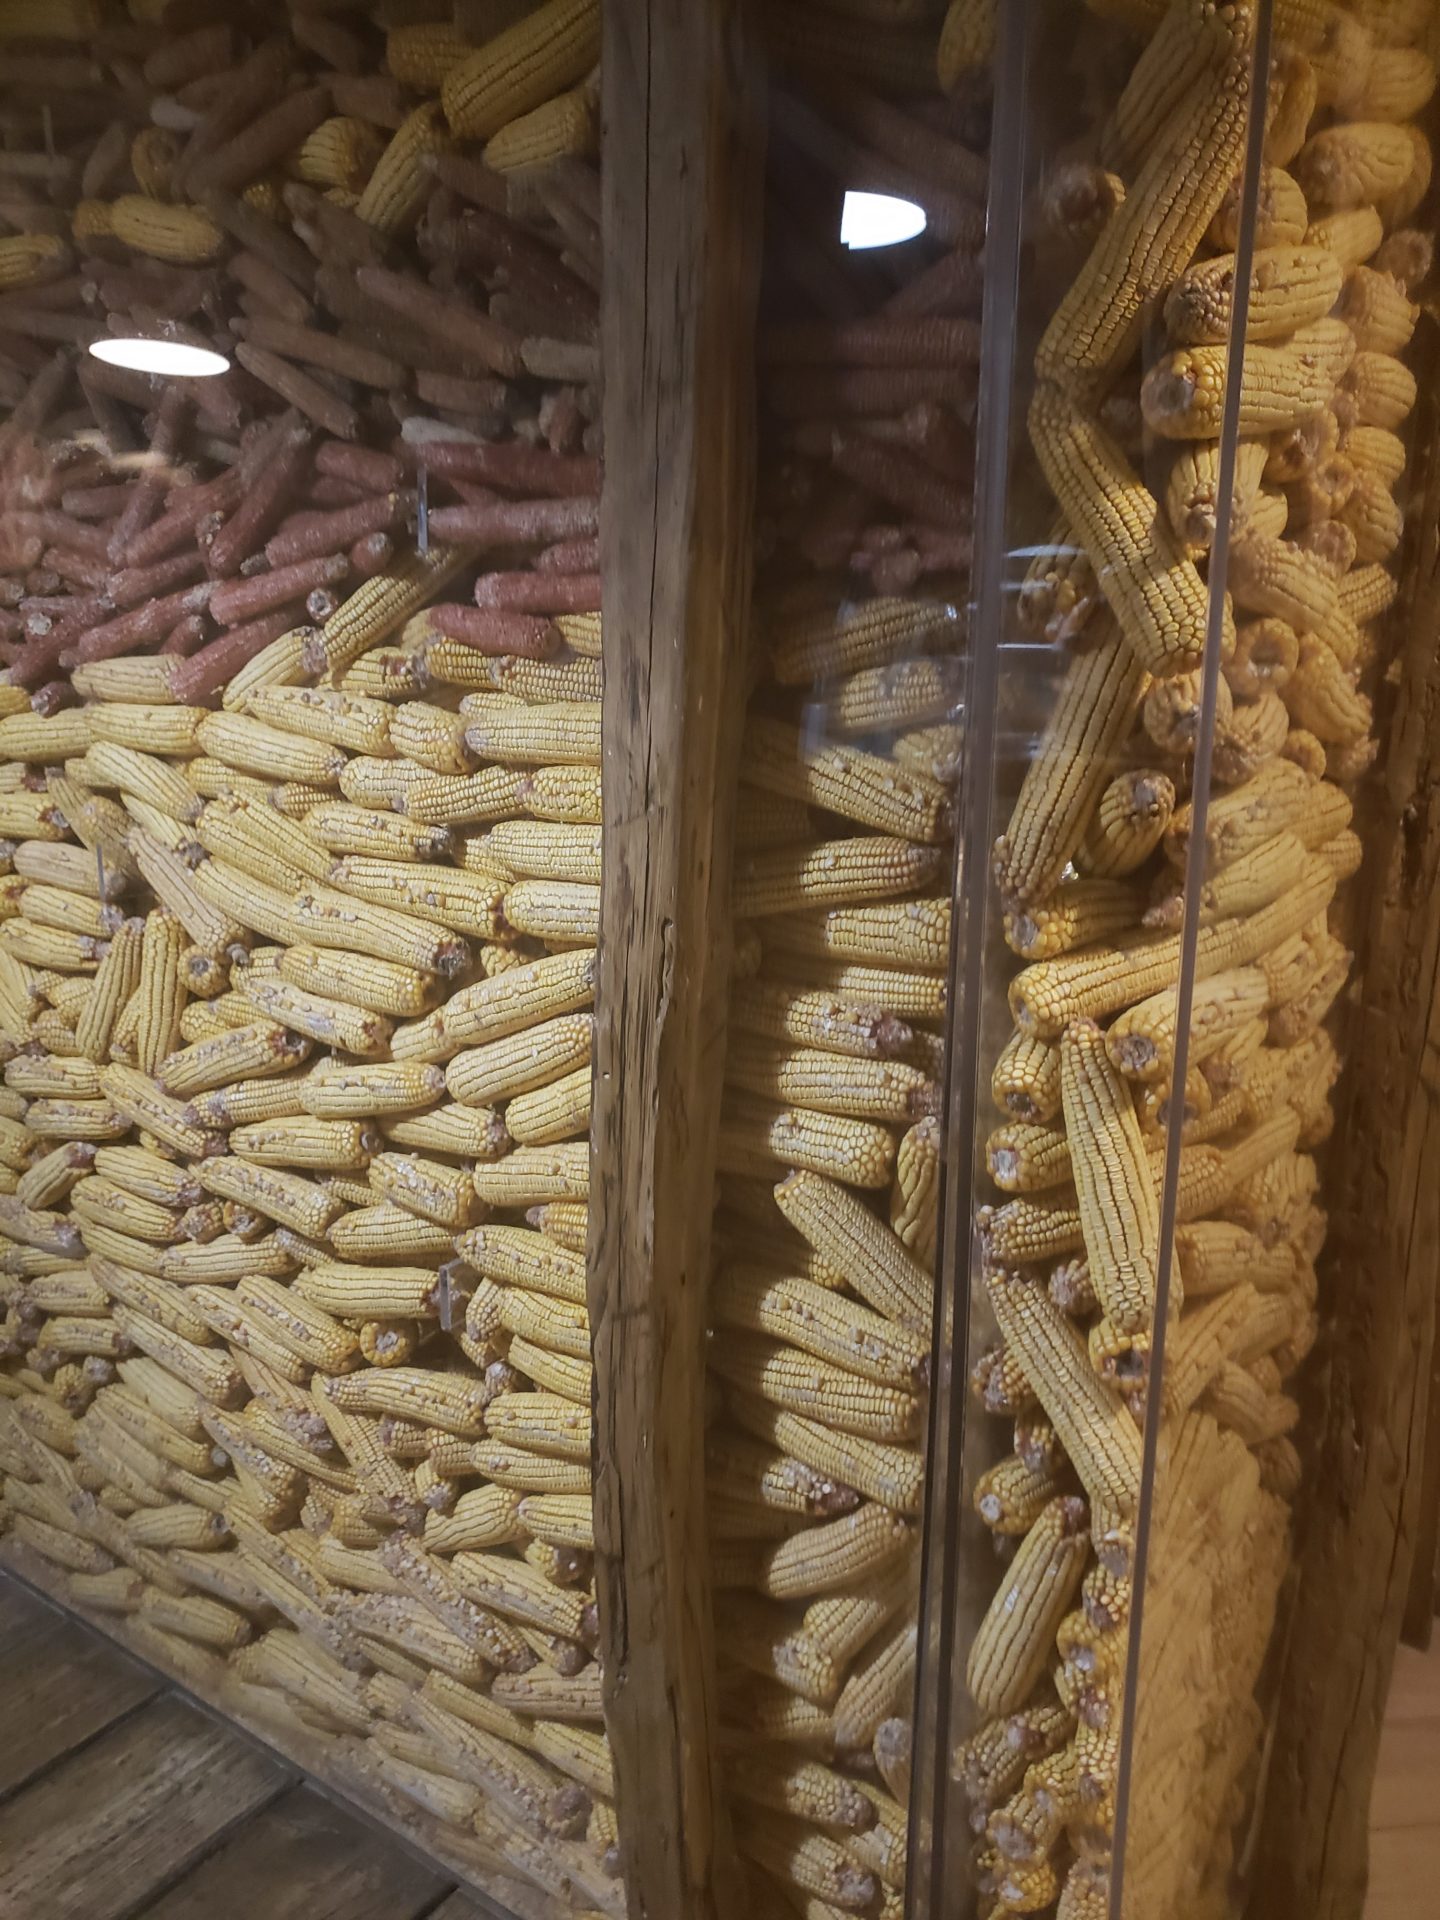 corn cobs stacked in a glass case